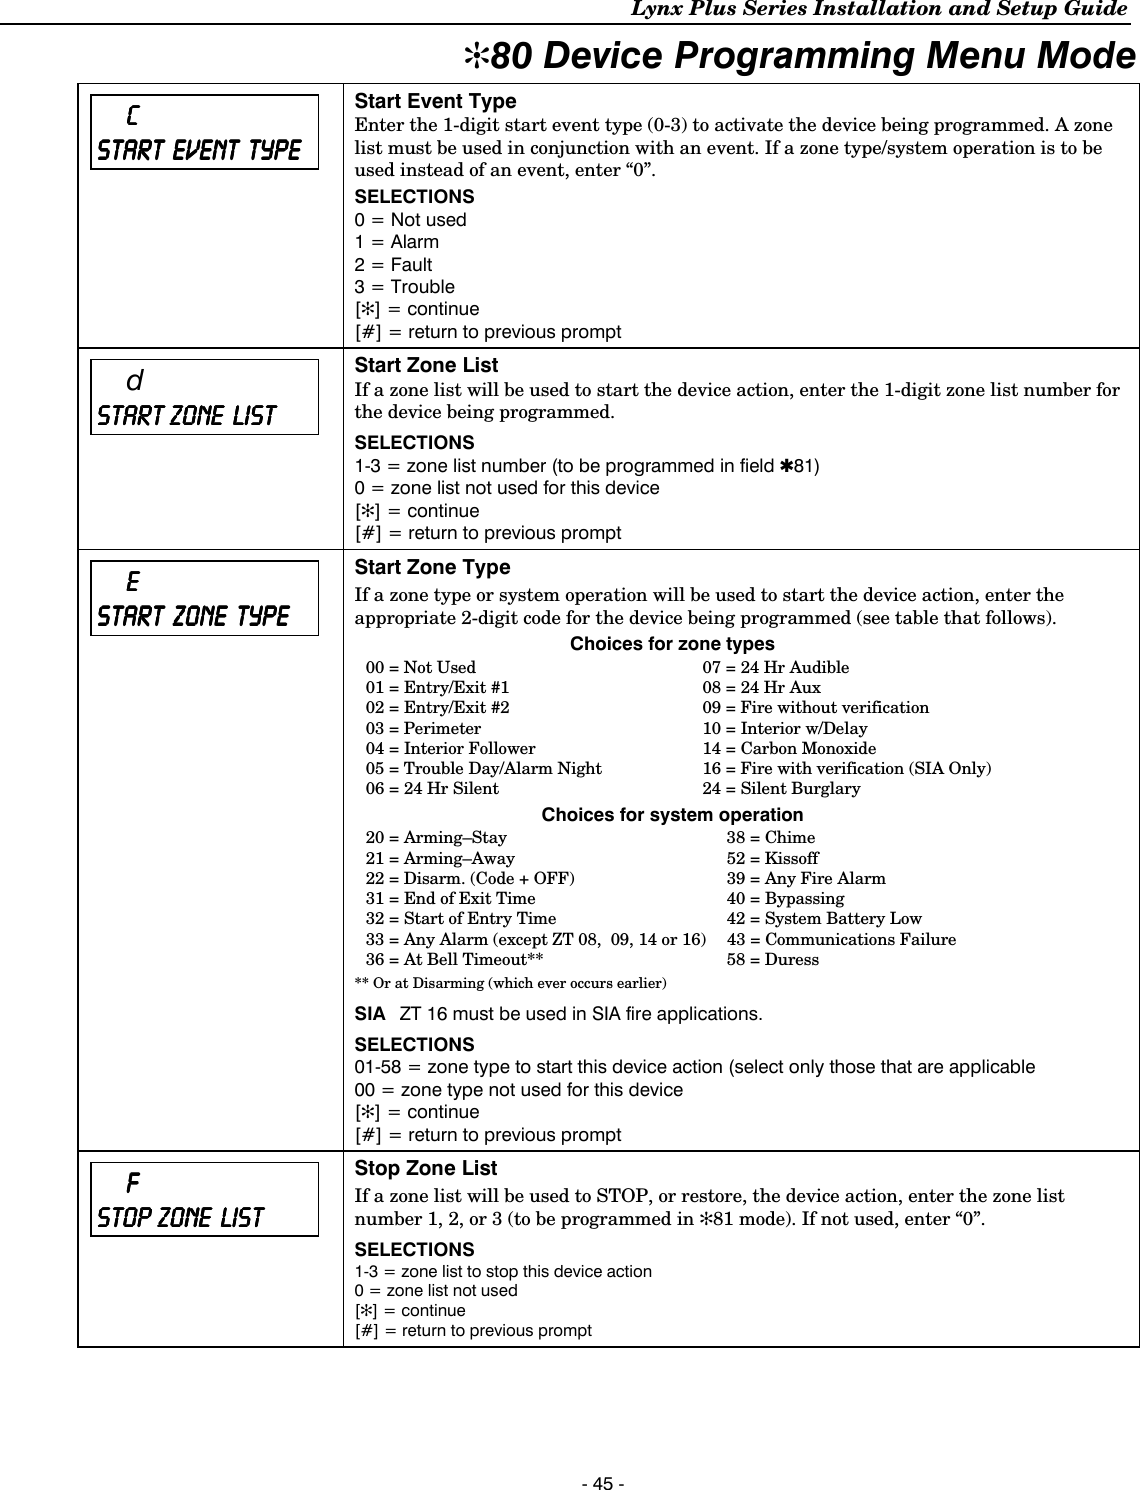 Lynx Plus Series Installation and Setup Guide  - 45 - ✻80 Device Programming Menu Mode       CCCC    START START START START         EVENT EVENT EVENT EVENT         TYPETYPETYPETYPE  Start Event Type  Enter the 1-digit start event type (0-3) to activate the device being programmed. A zone list must be used in conjunction with an event. If a zone type/system operation is to be used instead of an event, enter “0”. SELECTIONS 0 = Not used    1 = Alarm    2 = Fault 3 = Trouble [✻] = continue [#] = return to previous prompt      d STARSTARSTARSTART T T T     ZONE ZONE ZONE ZONE         LISTLISTLISTLIST  Start Zone List  If a zone list will be used to start the device action, enter the 1-digit zone list number for the device being programmed. SELECTIONS 1-3 = zone list number (to be programmed in field ✱81)  0 = zone list not used for this device [✻] = continue [#] = return to previous prompt   EEEE    STARTSTARTSTARTSTART         ZONE  ZONE  ZONE  ZONE         TYPETYPETYPETYPE  Start Zone Type If a zone type or system operation will be used to start the device action, enter the appropriate 2-digit code for the device being programmed (see table that follows).  Choices for zone types 00 = Not Used  07 = 24 Hr Audible 01 = Entry/Exit #1  08 = 24 Hr Aux 02 = Entry/Exit #2  09 = Fire without verification 03 = Perimeter  10 = Interior w/Delay 04 = Interior Follower  14 = Carbon Monoxide 05 = Trouble Day/Alarm Night  16 = Fire with verification (SIA Only) 06 = 24 Hr Silent  24 = Silent Burglary  Choices for system operation 20 = Arming–Stay  38 = Chime 21 = Arming–Away 52 = Kissoff 22 = Disarm. (Code + OFF)  39 = Any Fire Alarm 31 = End of Exit Time  40 = Bypassing 32 = Start of Entry Time  42 = System Battery Low 33 = Any Alarm (except ZT 08,  09, 14 or 16)  43 = Communications Failure 36 = At Bell Timeout**  58 = Duress  ** Or at Disarming (which ever occurs earlier)  SIA  ZT 16 must be used in SIA fire applications. SELECTIONS 01-58 = zone type to start this device action (select only those that are applicable 00 = zone type not used for this device [✻] = continue  [#] = return to previous prompt      FFFF    STOP STOP STOP STOP     ZONE ZONE ZONE ZONE   LIST  LIST  LIST  LIST  Stop Zone List If a zone list will be used to STOP, or restore, the device action, enter the zone list number 1, 2, or 3 (to be programmed in ✻81 mode). If not used, enter “0”. SELECTIONS 1-3 = zone list to stop this device action 0 = zone list not used [✻] = continue [#] = return to previous prompt    